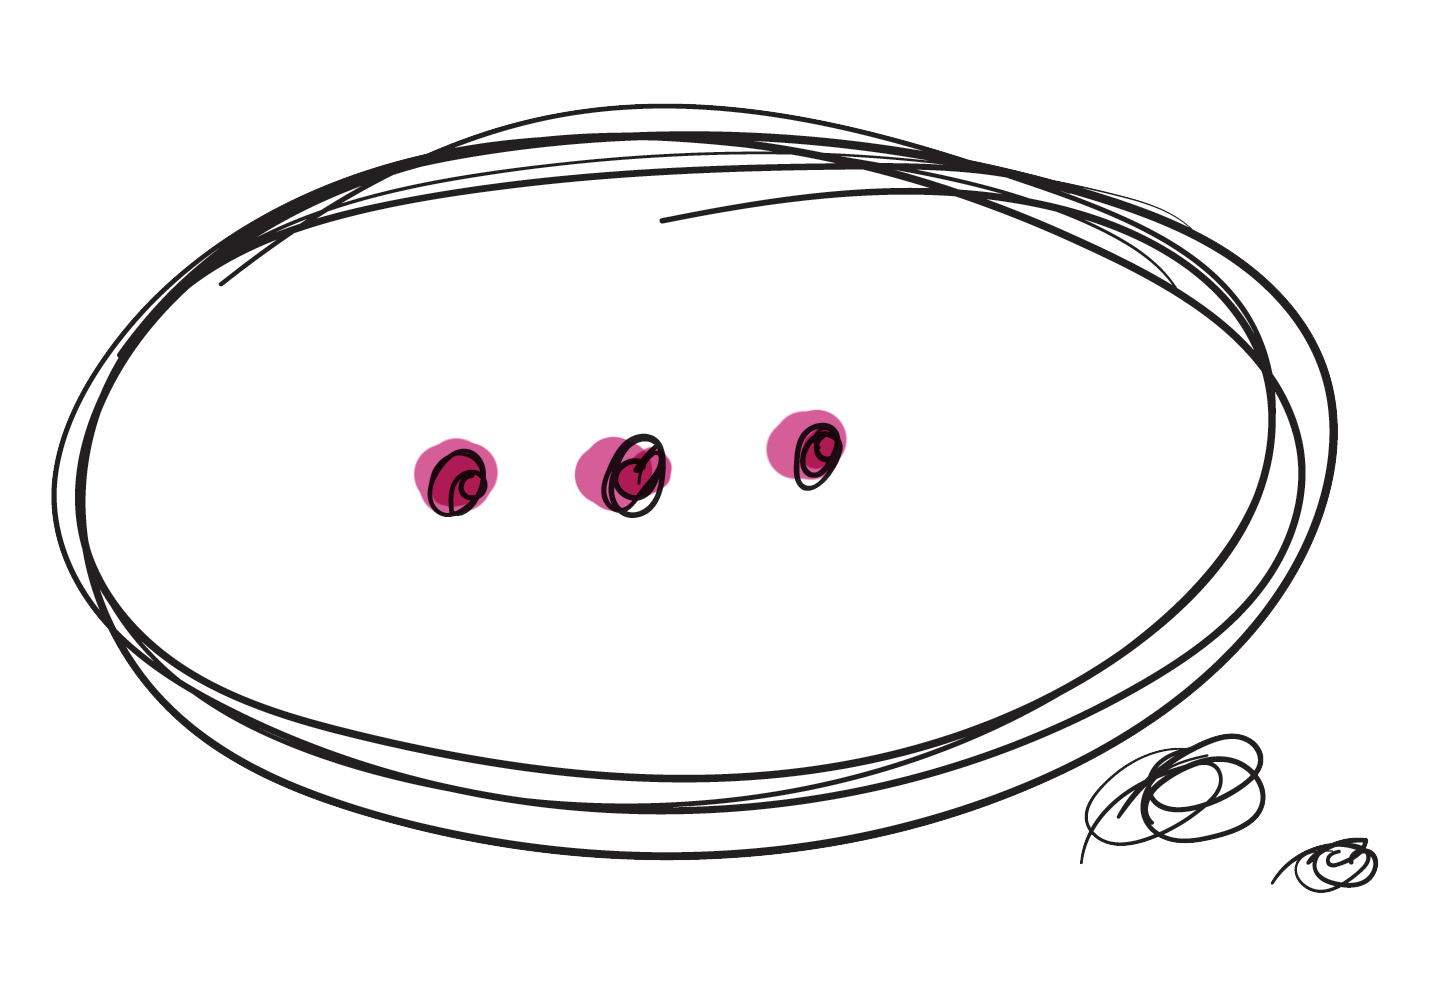 Illustration of a cartoon face with a minimalist LaineToo style, featuring three spirals representing eyes and a mouth on an oval head.